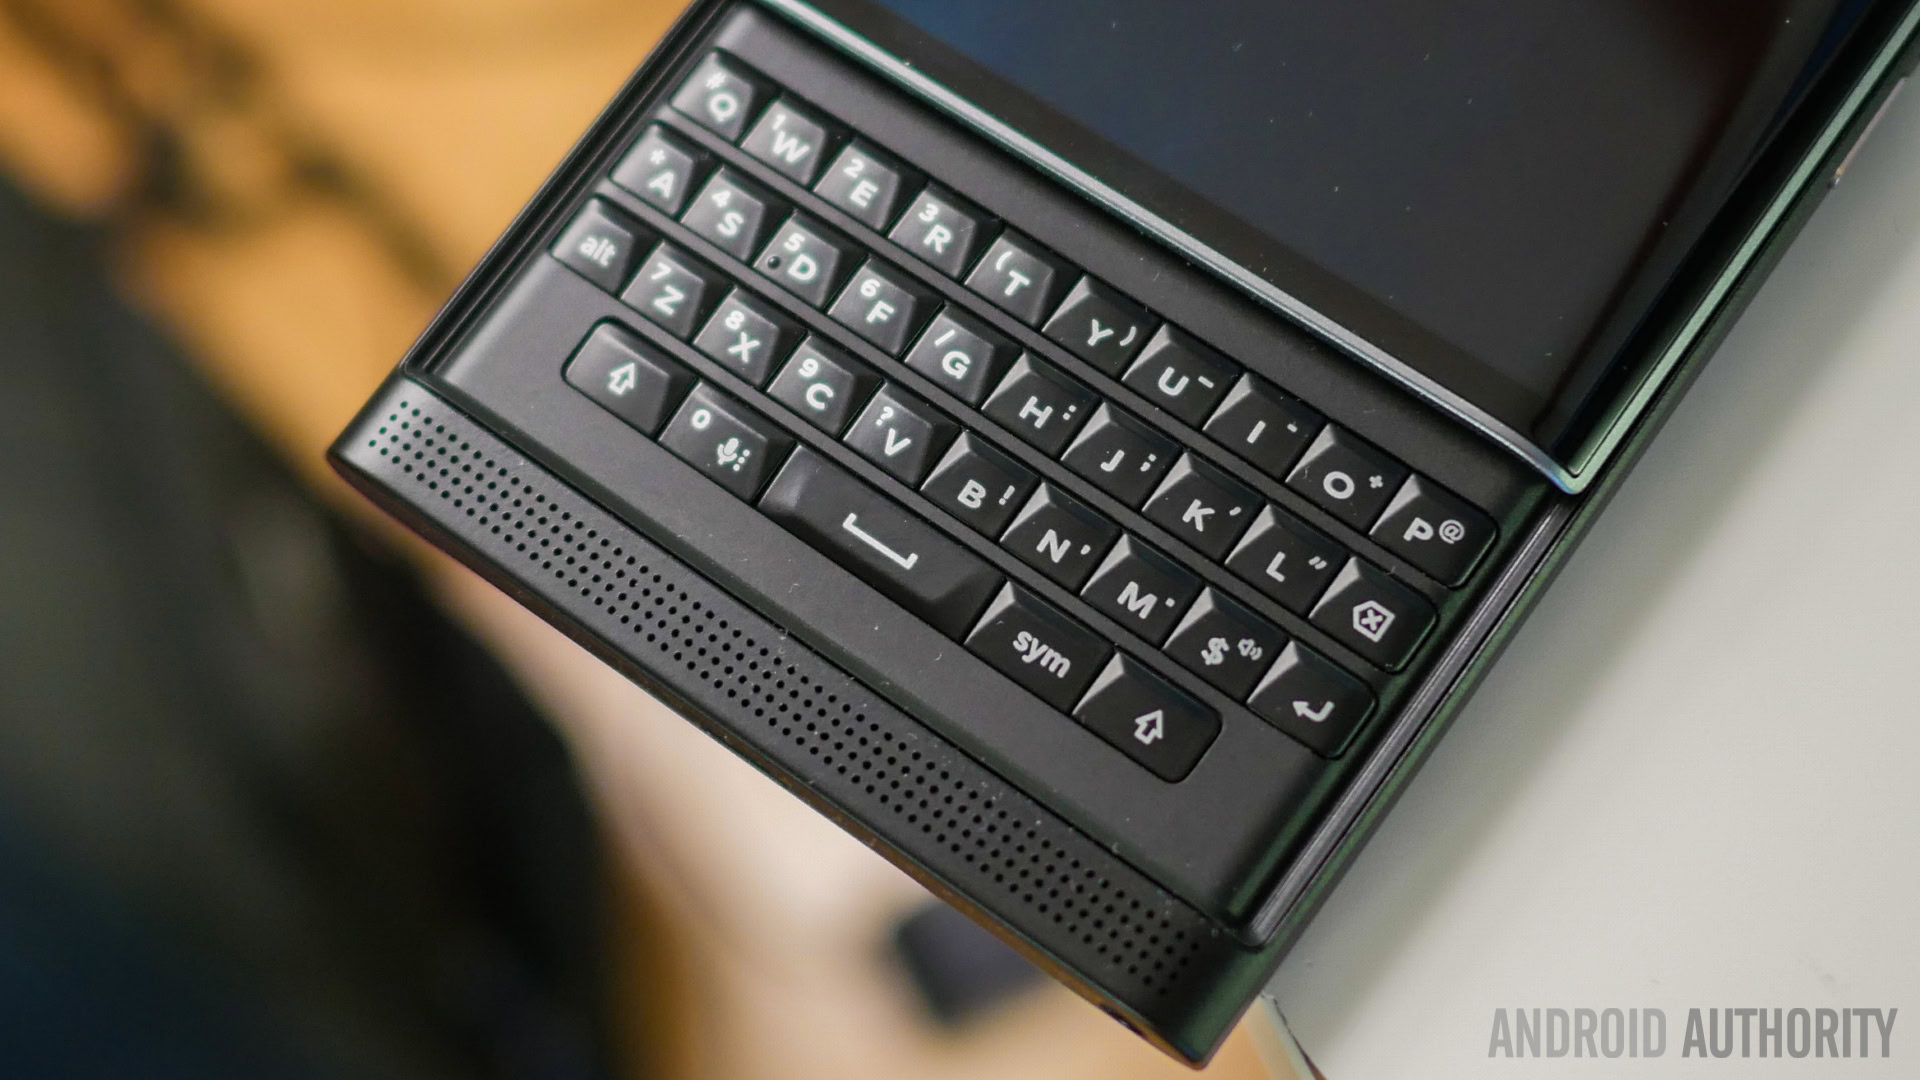 BlackBerry's signature keyboard to be given one last hurrah